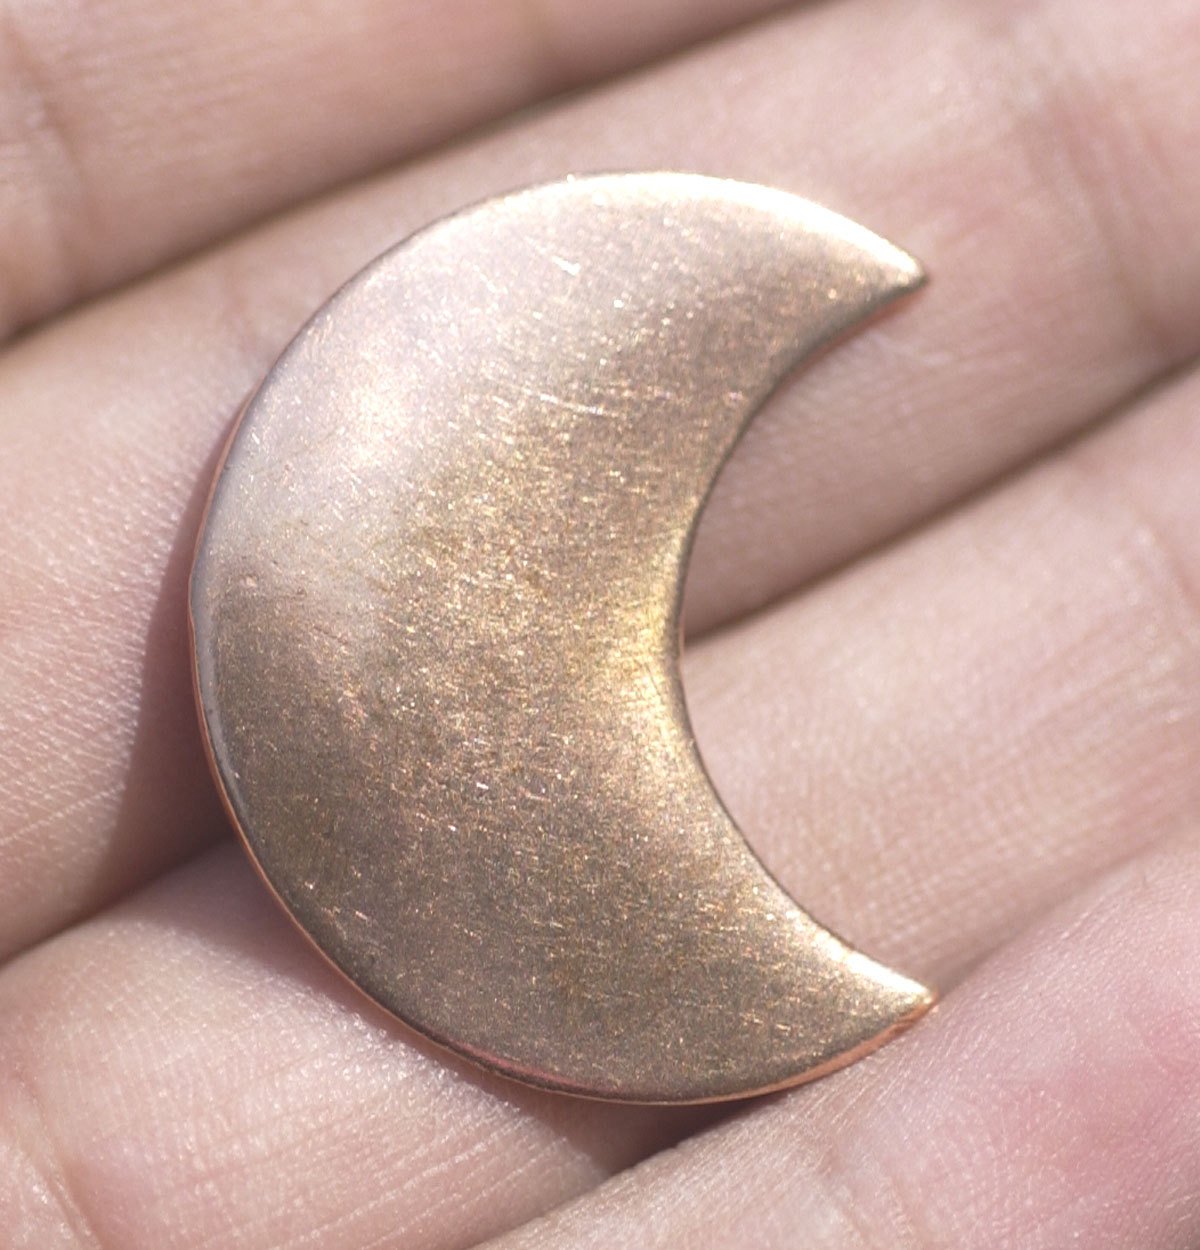 Copper Blank 29.5mm x 23mm 20g Moon Cheshire for Blanks Enameling Stamping Texturing Soldering - 4 pieces